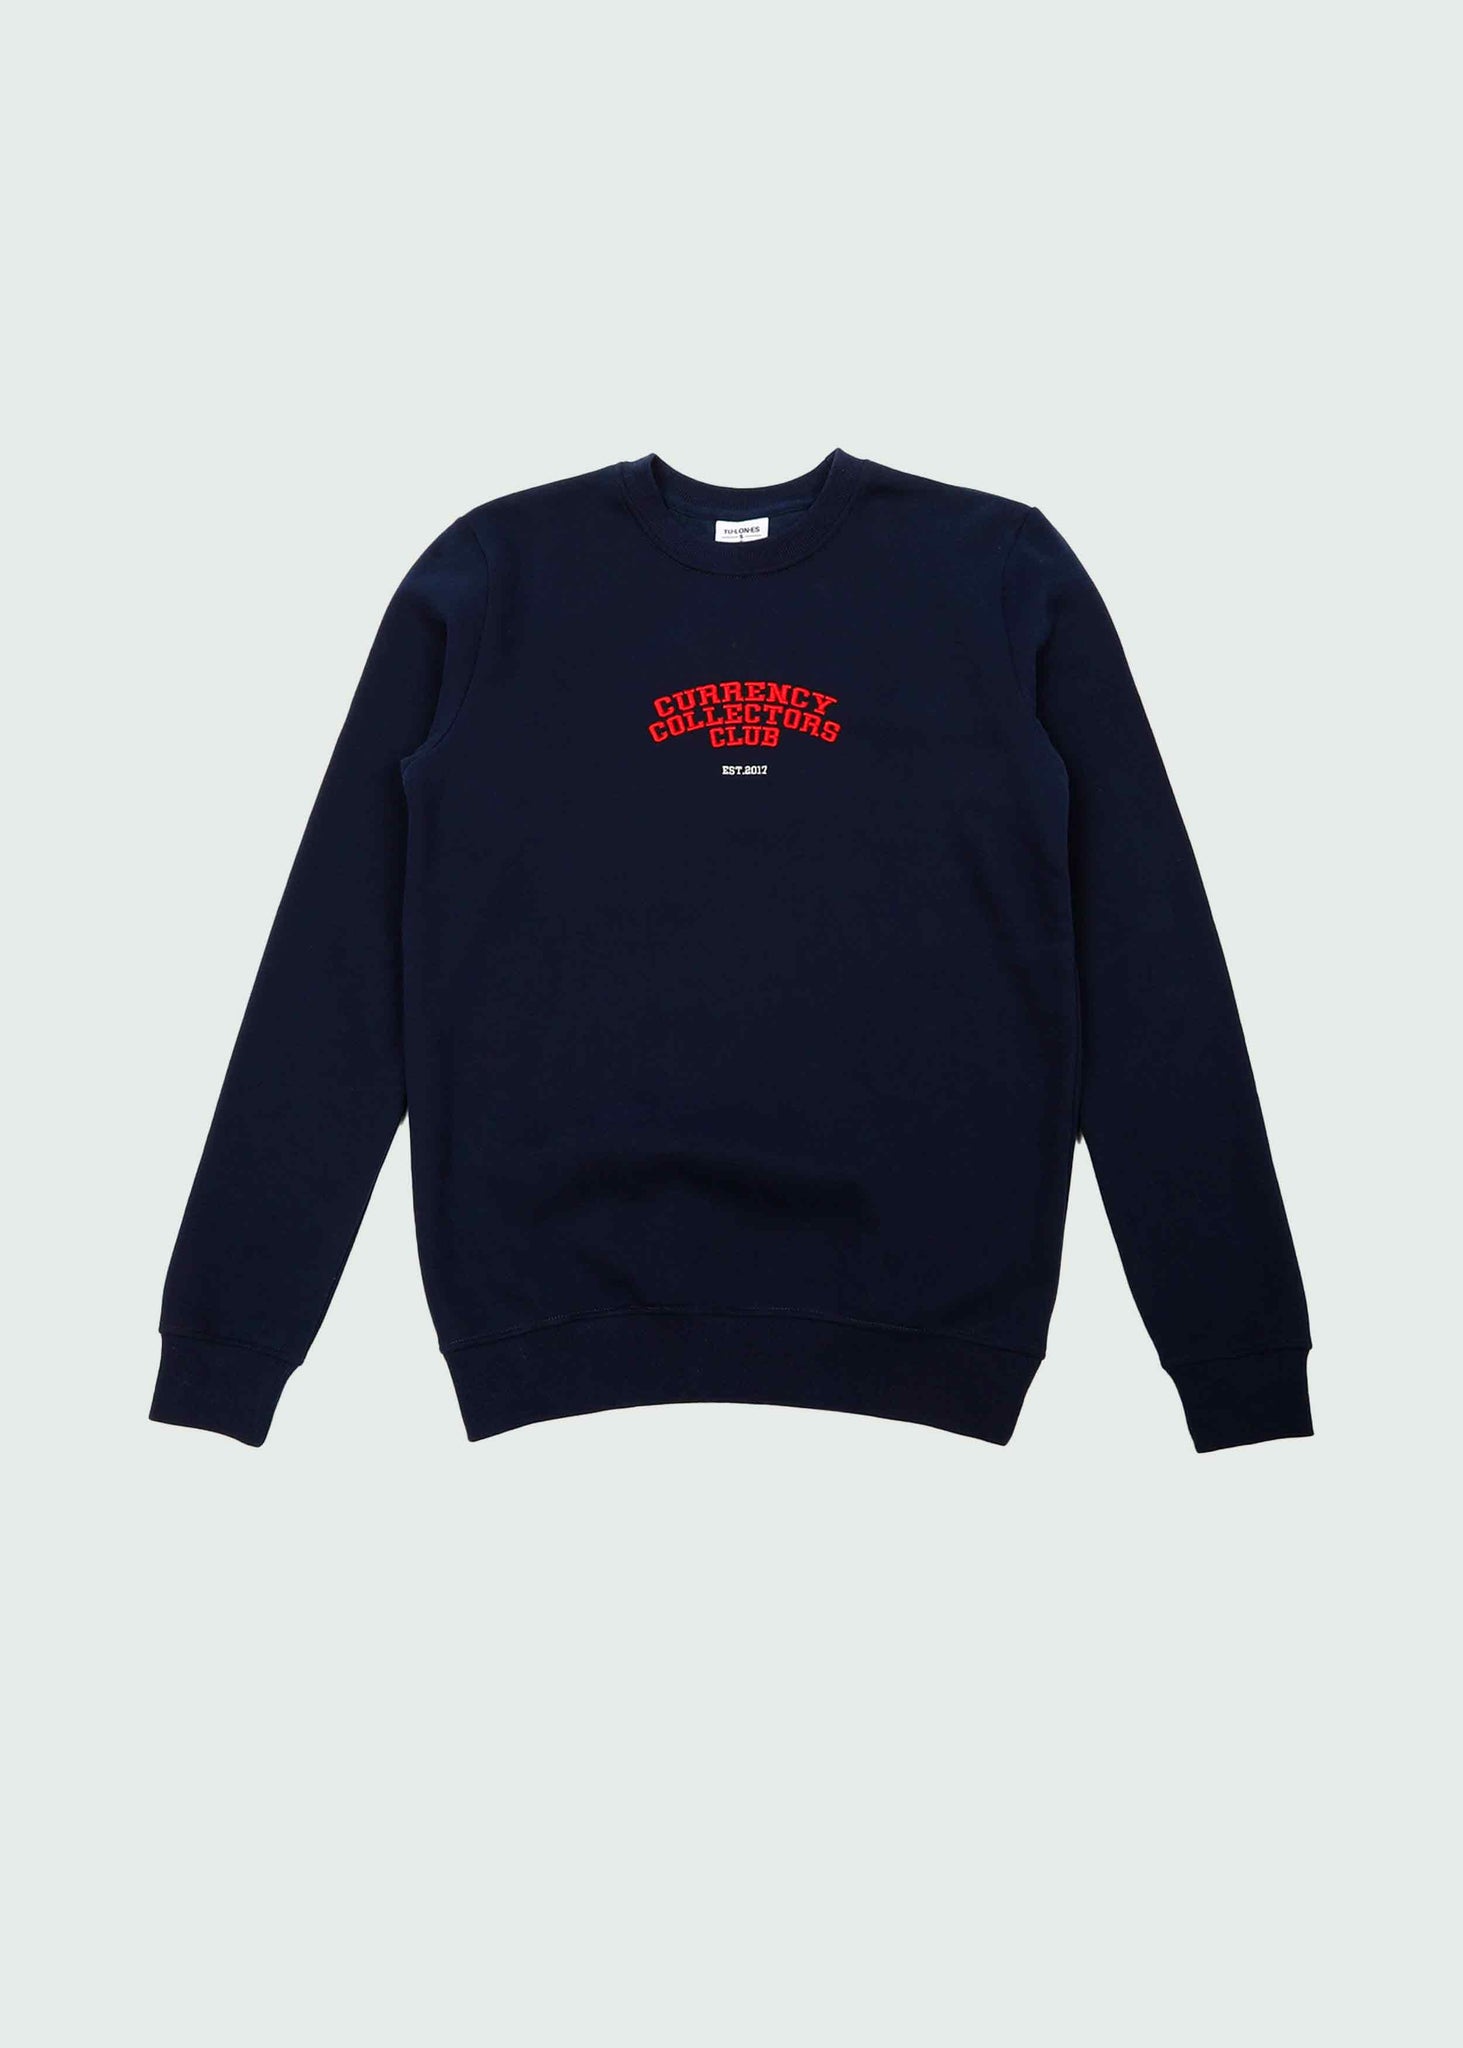 Navy Currency Collector Club Crewneck Sweater